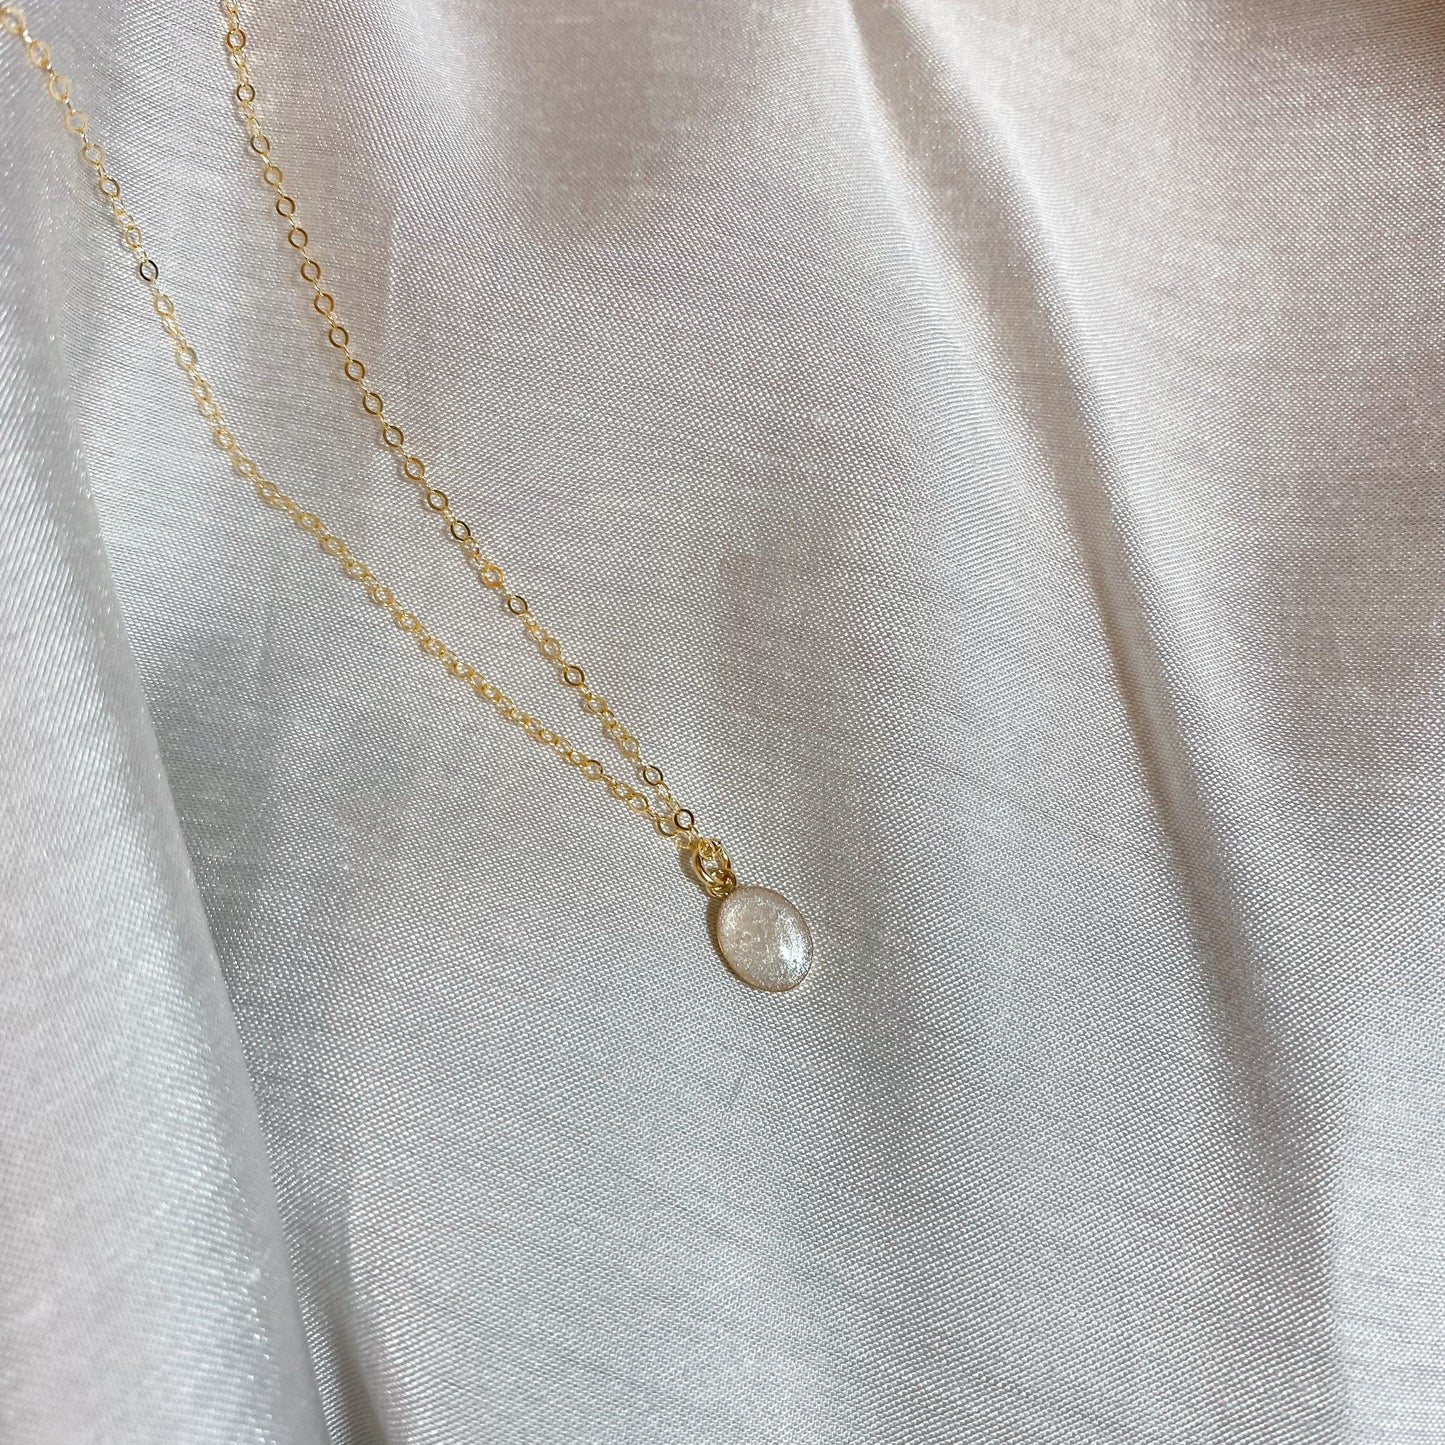 Small Oval Necklace